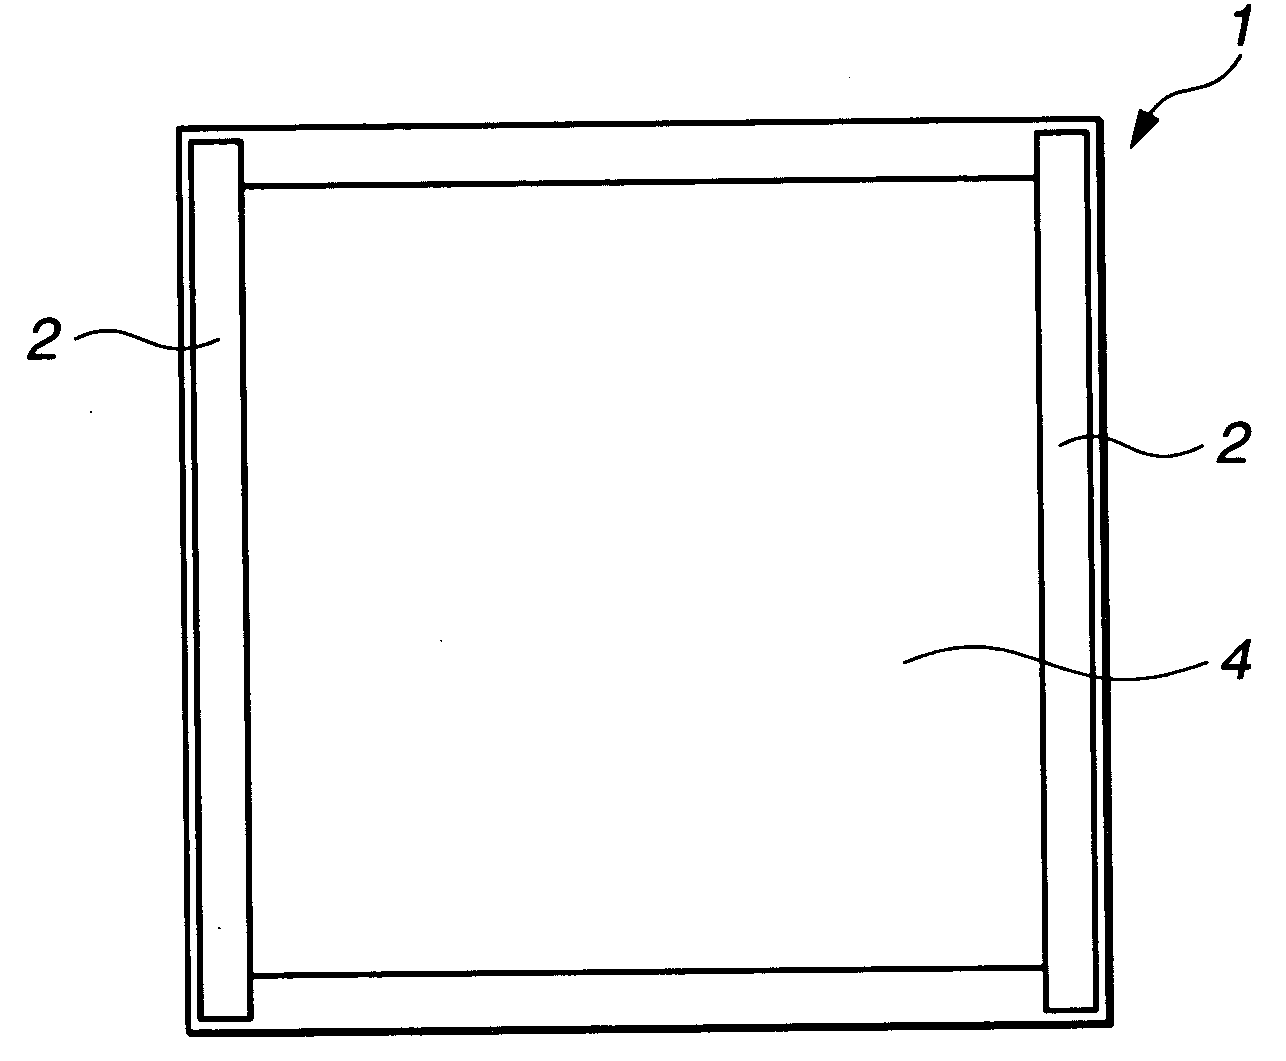 Method of selecting photomask blank substrates